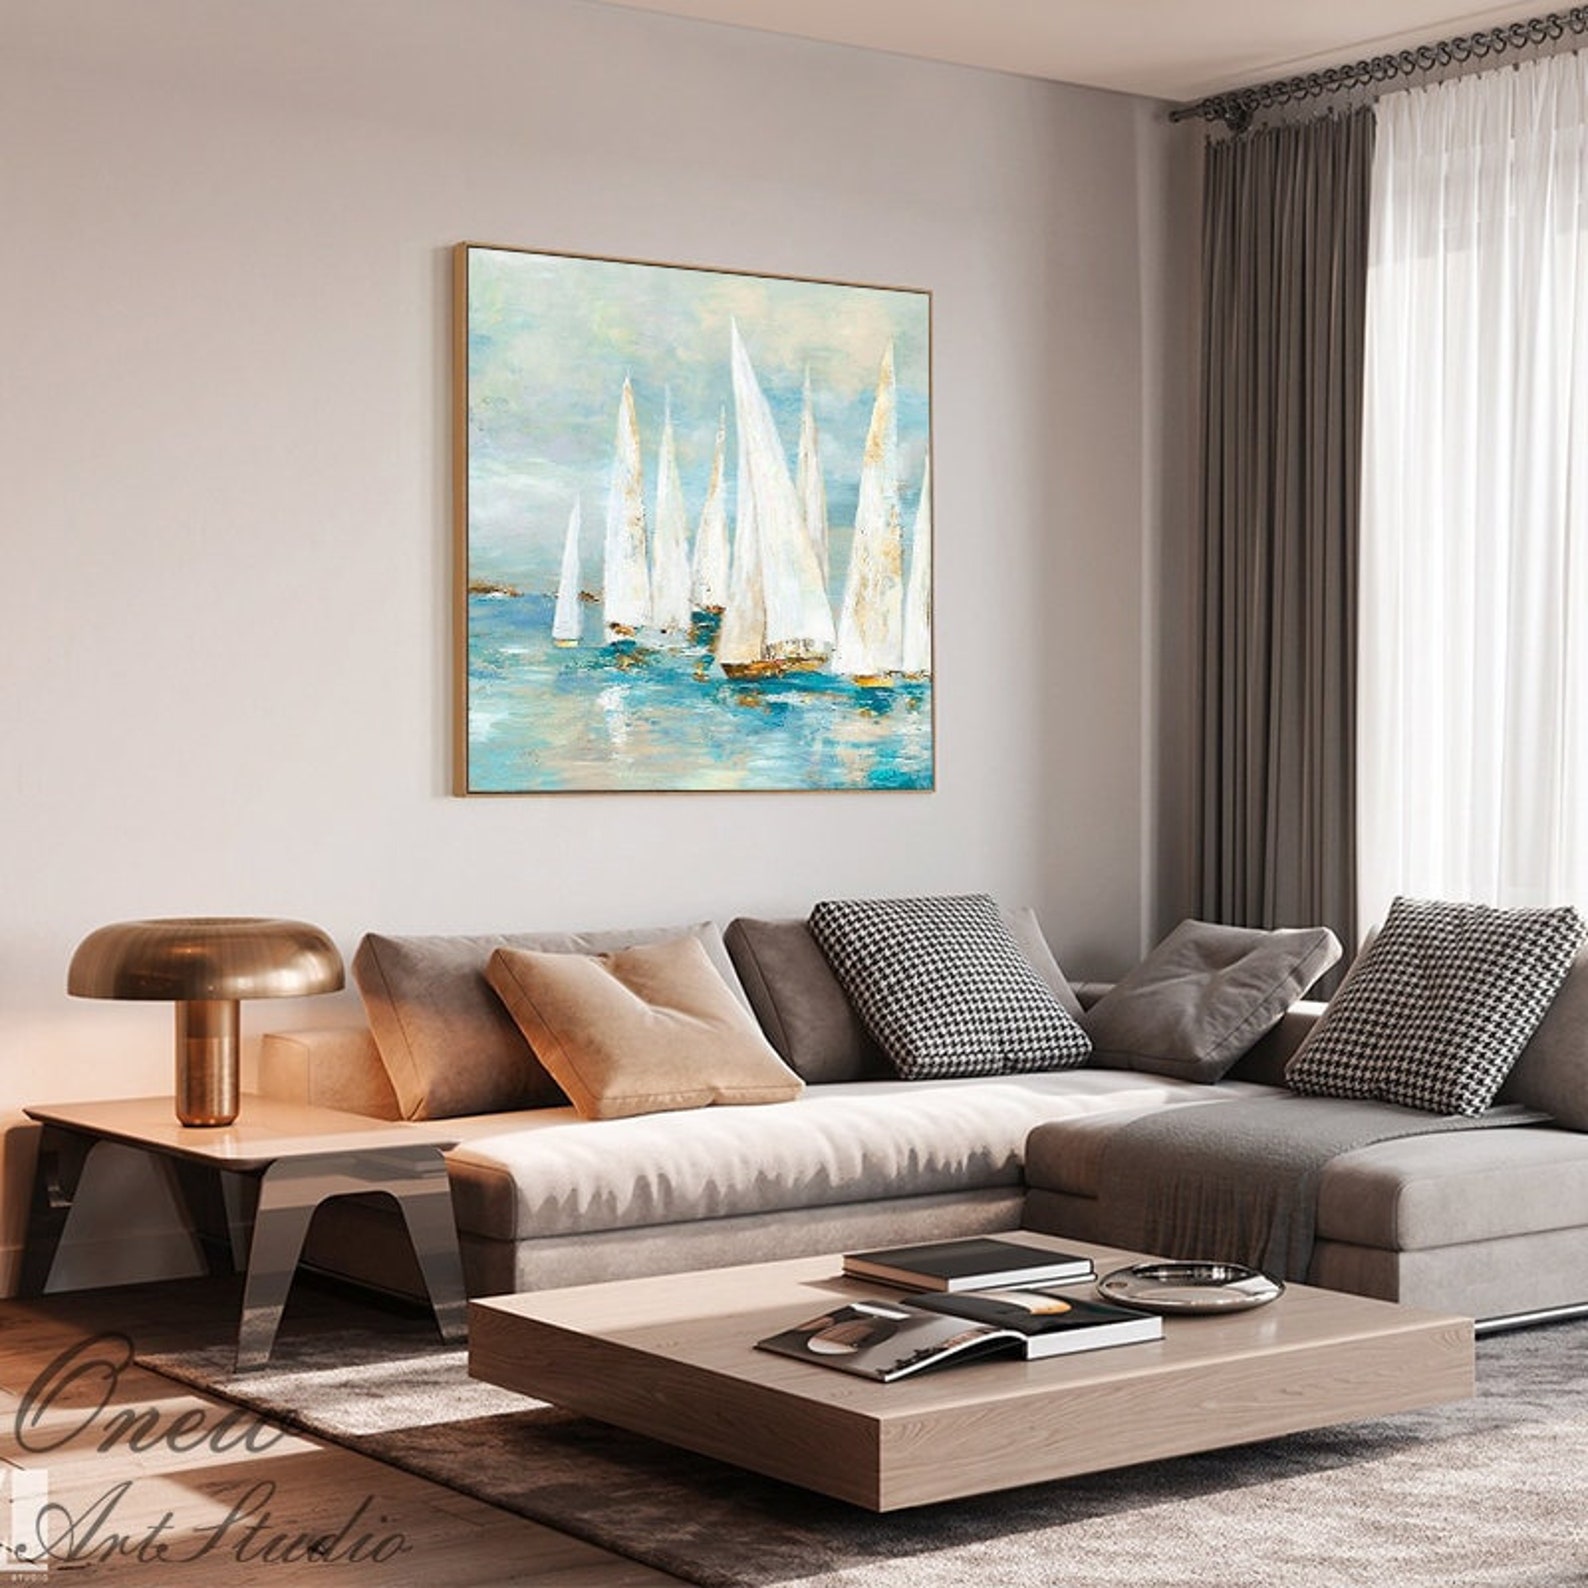 Abstract White Sailboats Painting on Canvas Large Original - Etsy